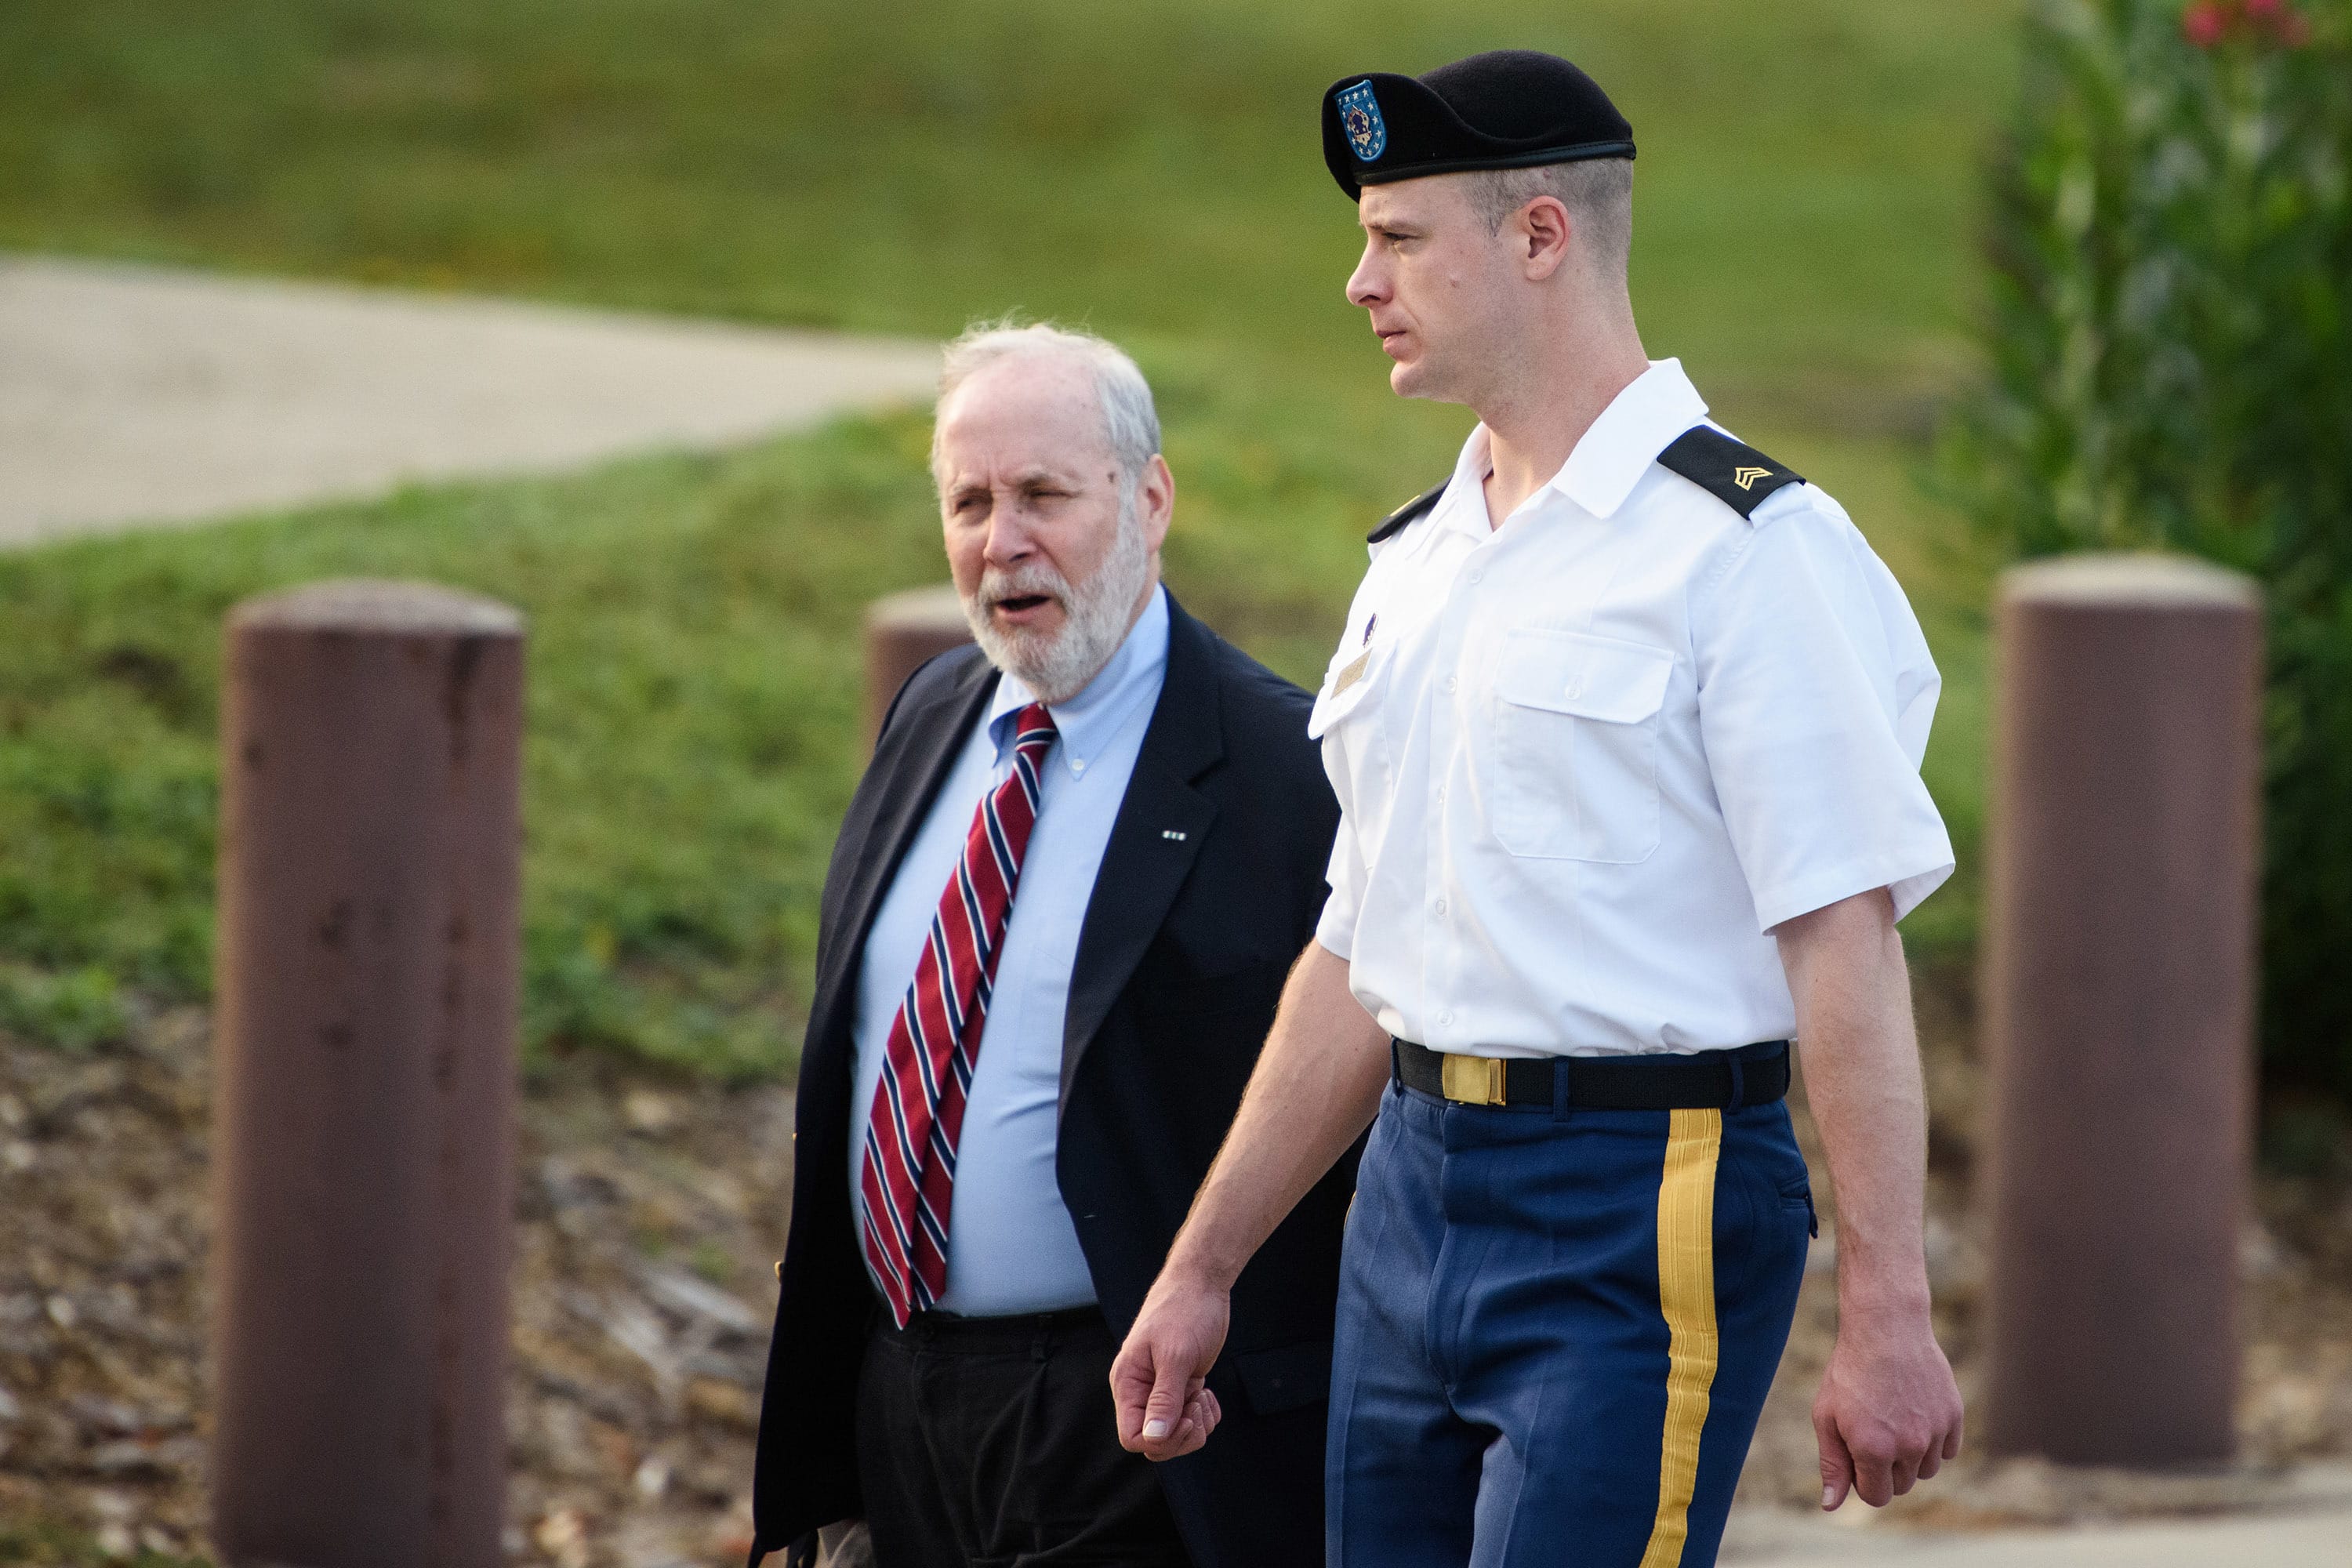 Sgt. Bowe Bergdahl, right, arrives with his civilian attorney, Eugene Fidell, for a legal hearing at the courtroom on Wednesday, Aug. 24, 2016, on Fort Bragg, N.C. Bergdahl, who disappeared in Afghanistan in 2009 and was held by the Taliban for five years, is charged with desertion and misbehavior before the enemy.